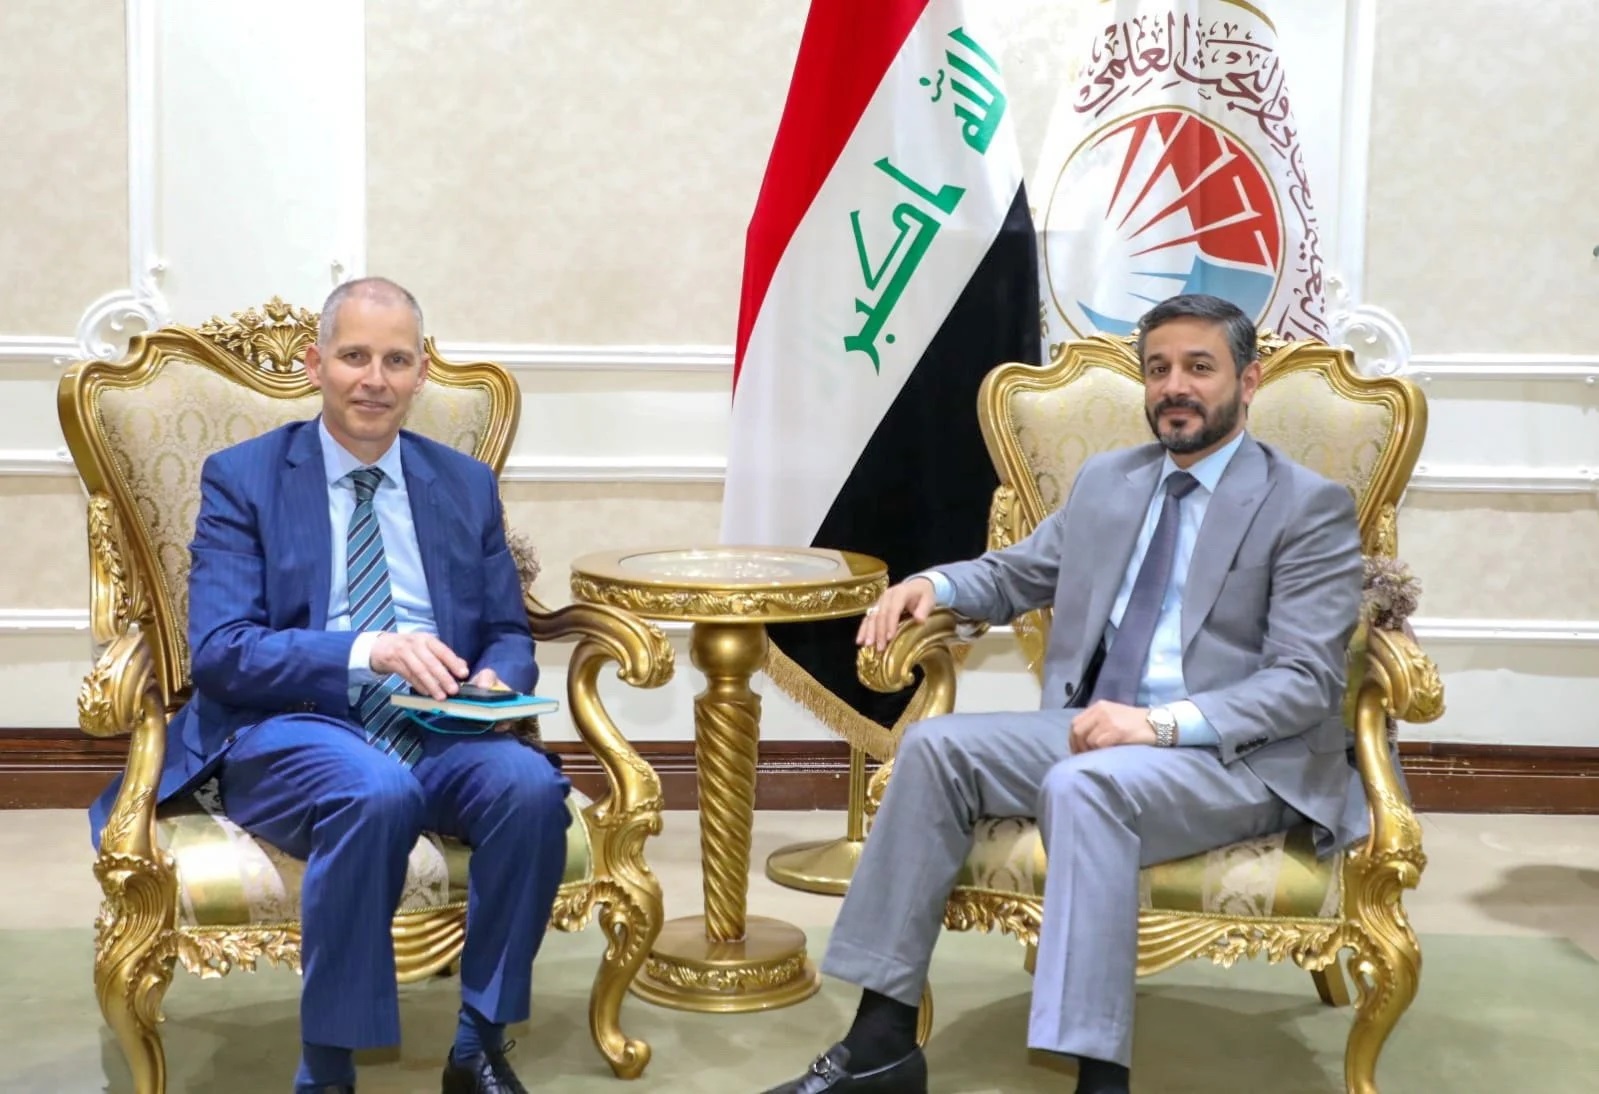 Read more about the article Dr. Al-Aboudi Meets British Council’s Director in Iraq, His Excellency Reviews Training & Development Programs with Universities